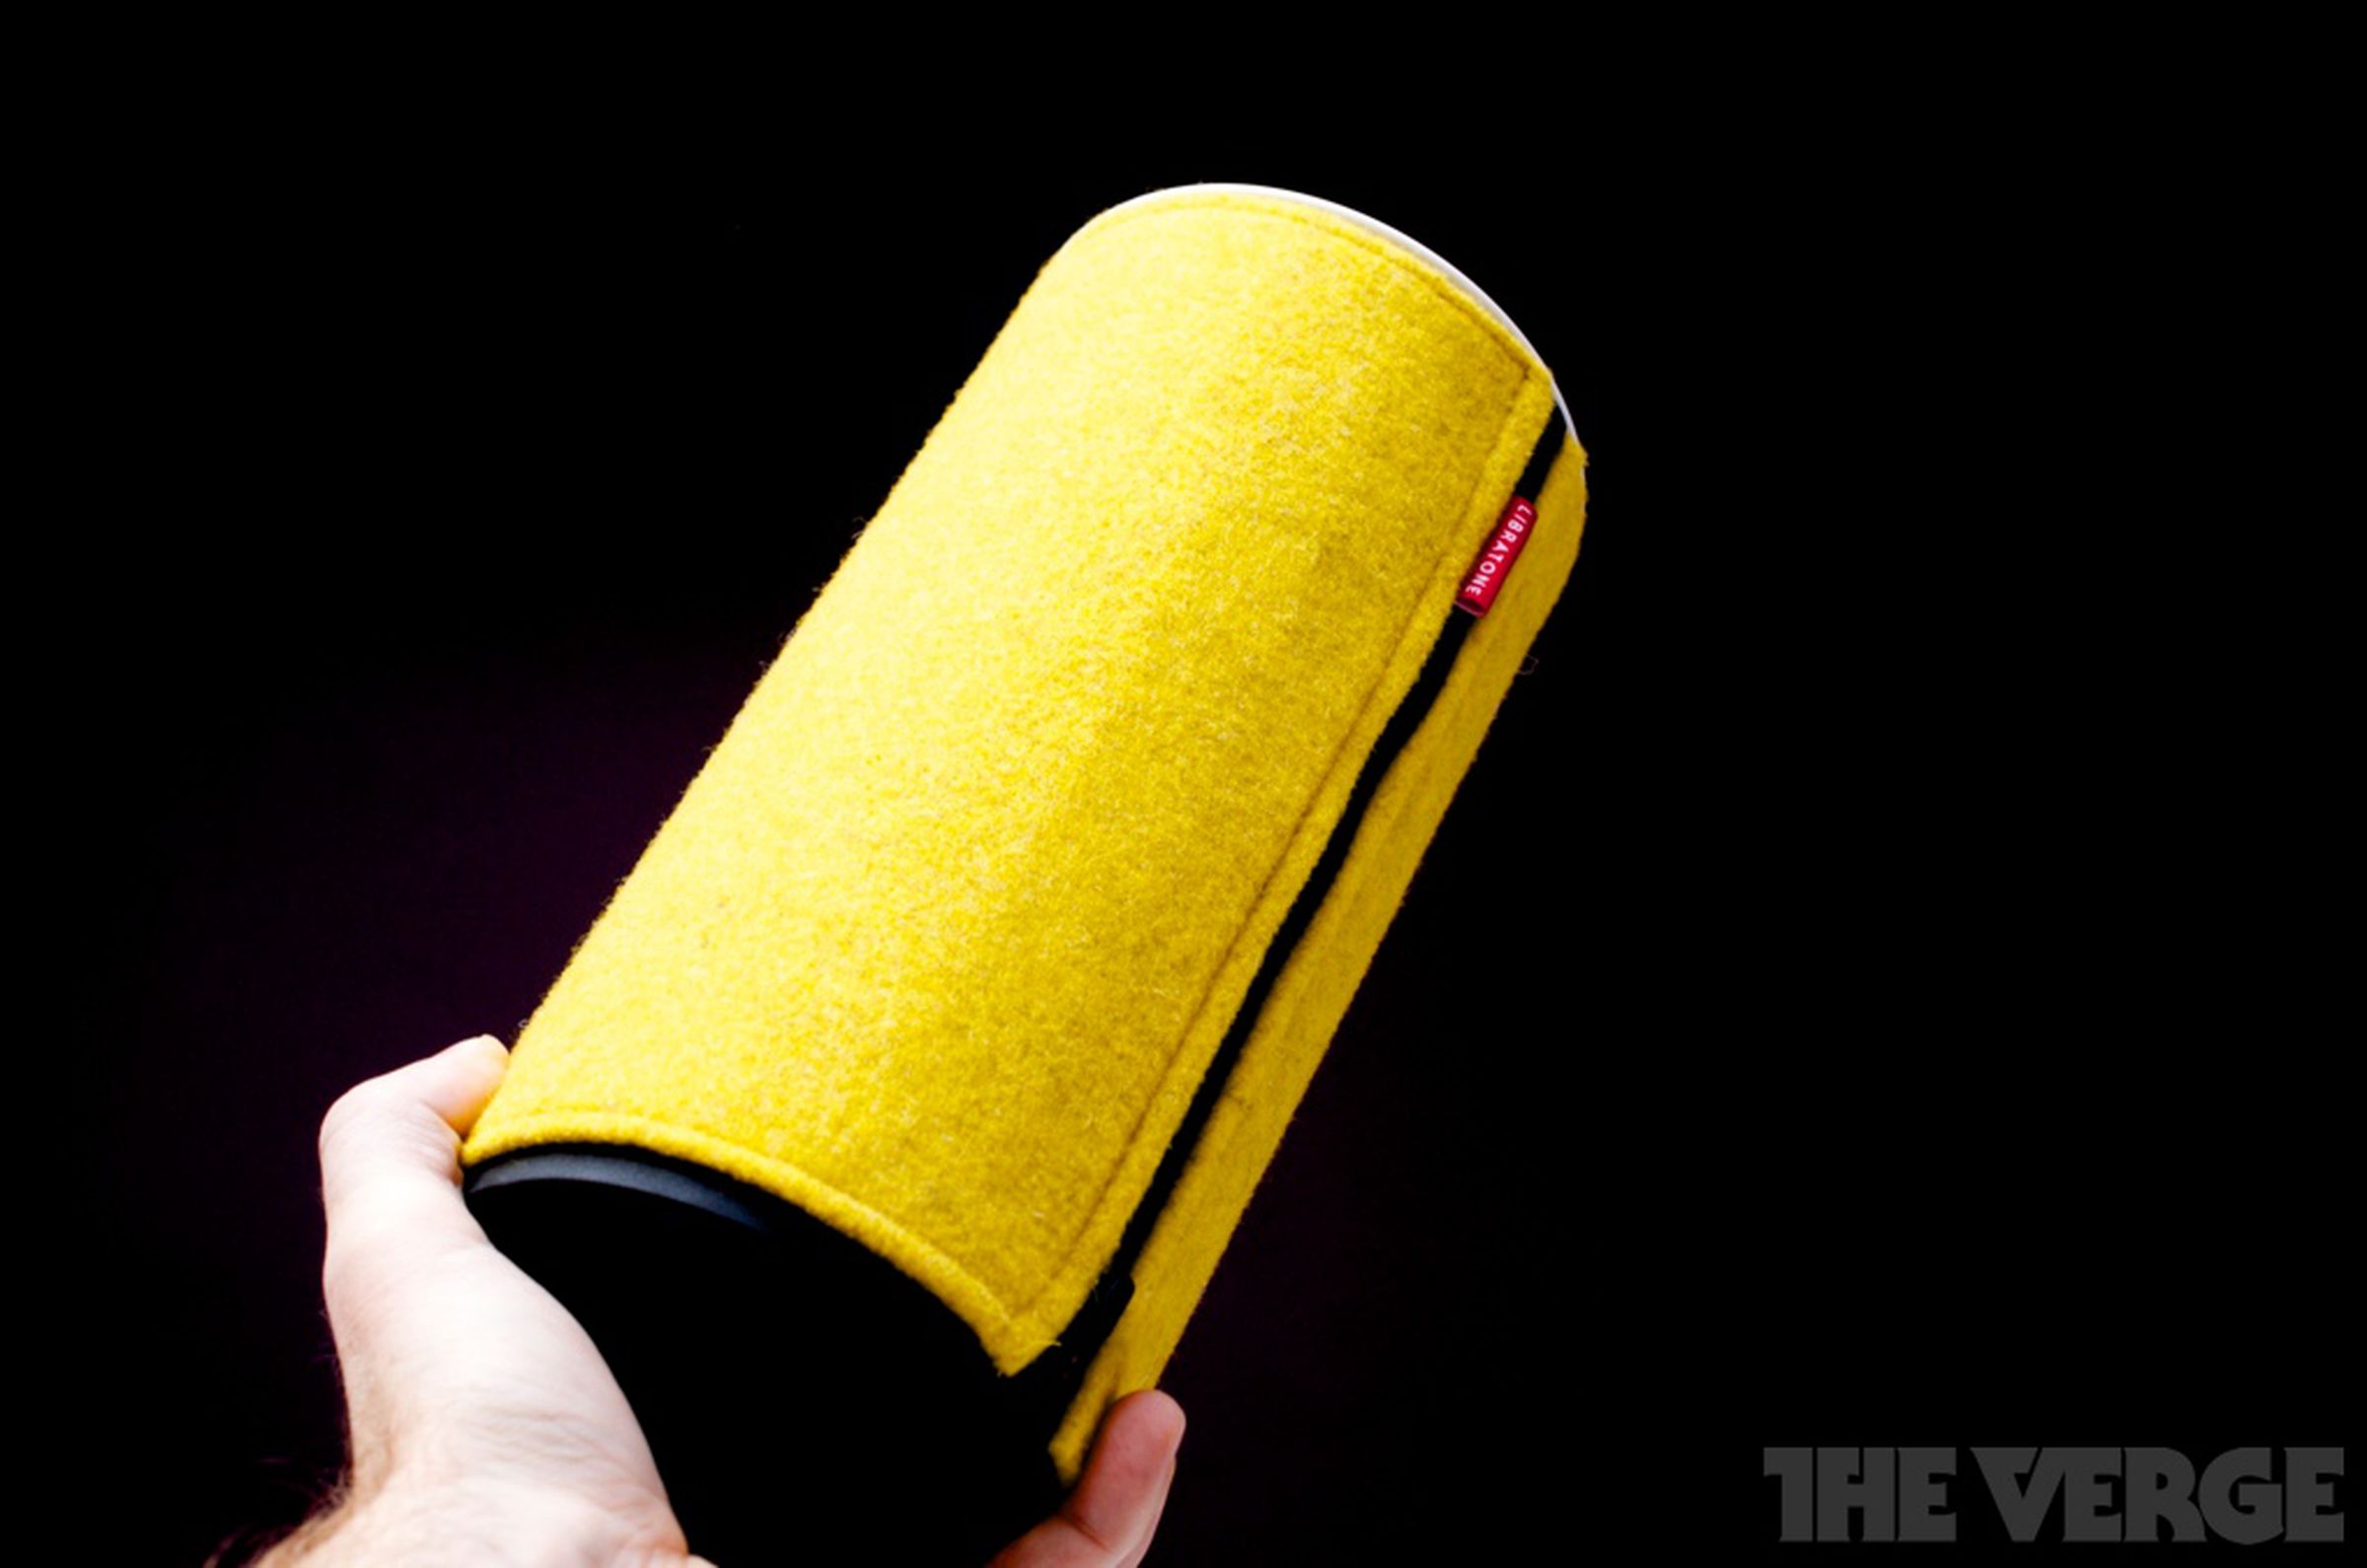 Libratone Zipp review, setup, and unboxing gallery